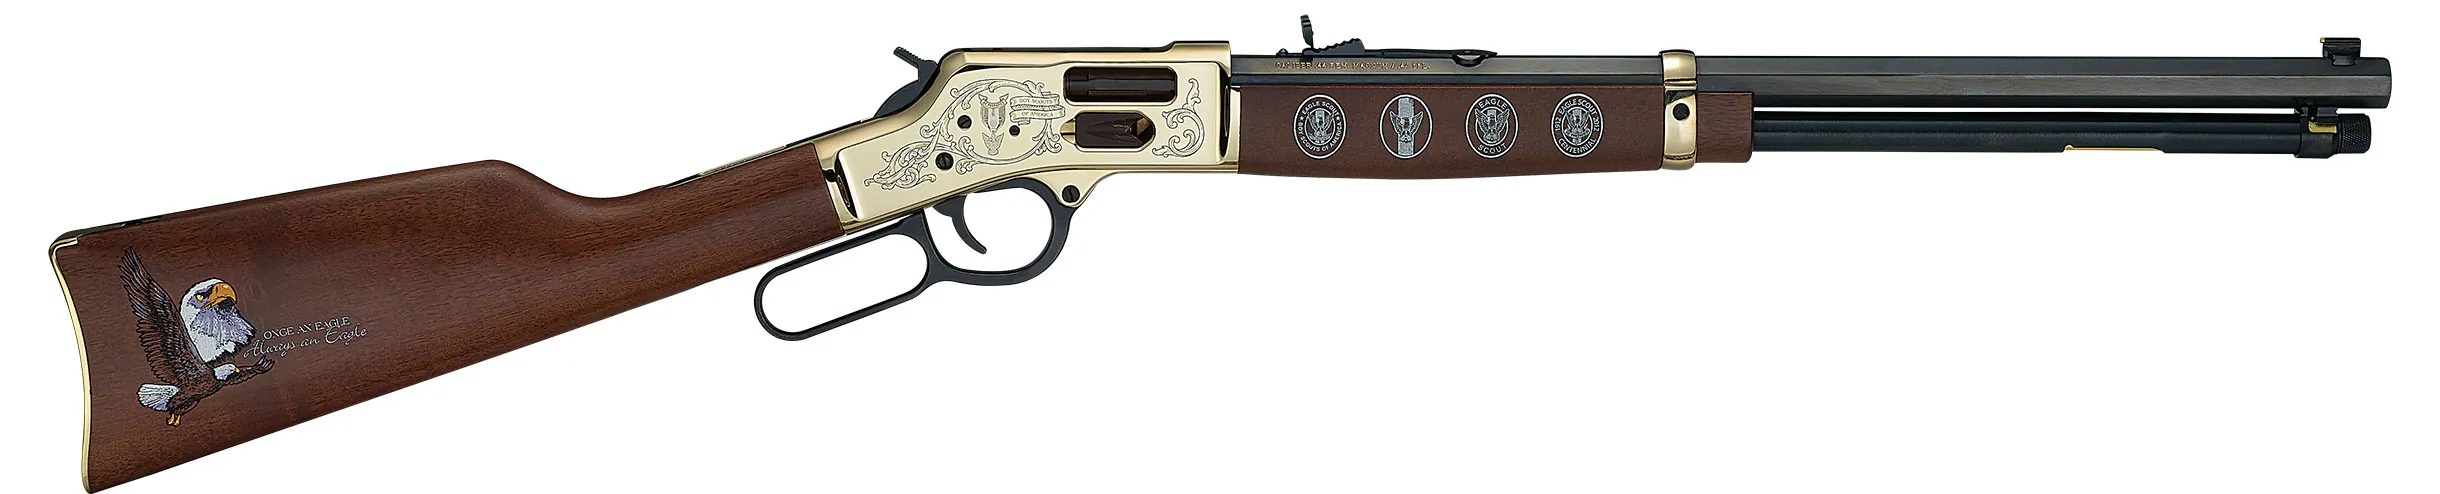 Buy Henry Big Boy Eagle Scout Centennial Tribute Edition .44 Mag/.44 Spl Online